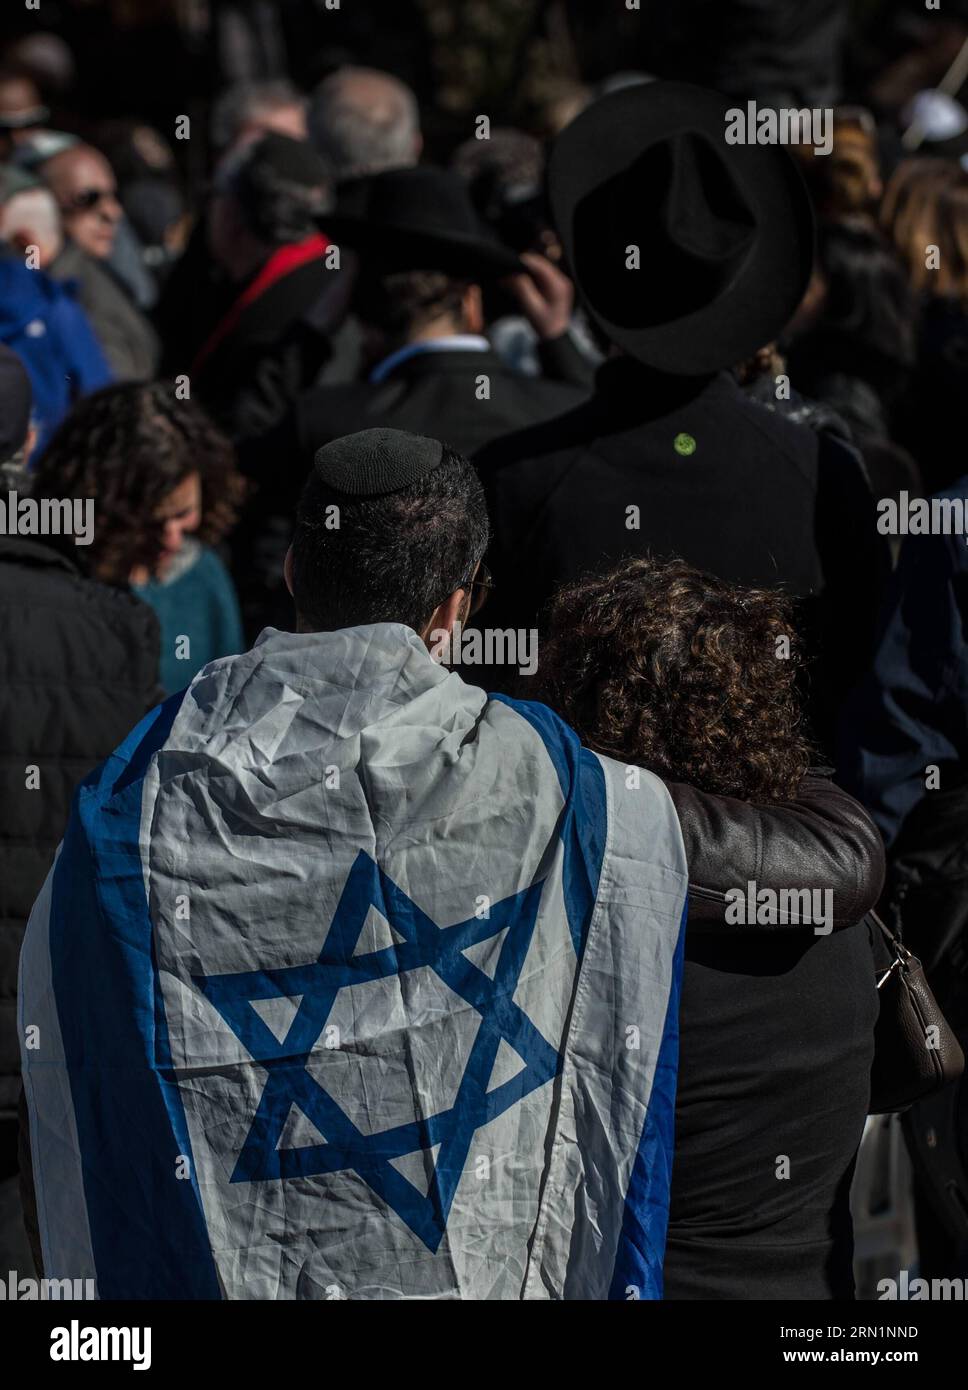 (150113) -- JERUSALEM, Jan. 13, 2015 -- A man with the Israeli national flag on his shoulders attends a funeral ceremony for the four victims of Paris supermarket attack at Givat Shaul cemetery, on the outskirts of Jerusalem, on Jan. 13, 2015. Israeli leaders and multitude of mourners gathered Tuesday with the families of four Jewish victims of last week s terror attack on a Paris kosher supermarket for a solemn funeral ceremony at a Jerusalem cemetery. Yoav Hattab, Yohan Cohen, Philippe Braham and Francois-Michel Saada, were gunned down on Friday during a hostage attack on Hyper Casher superm Stock Photo